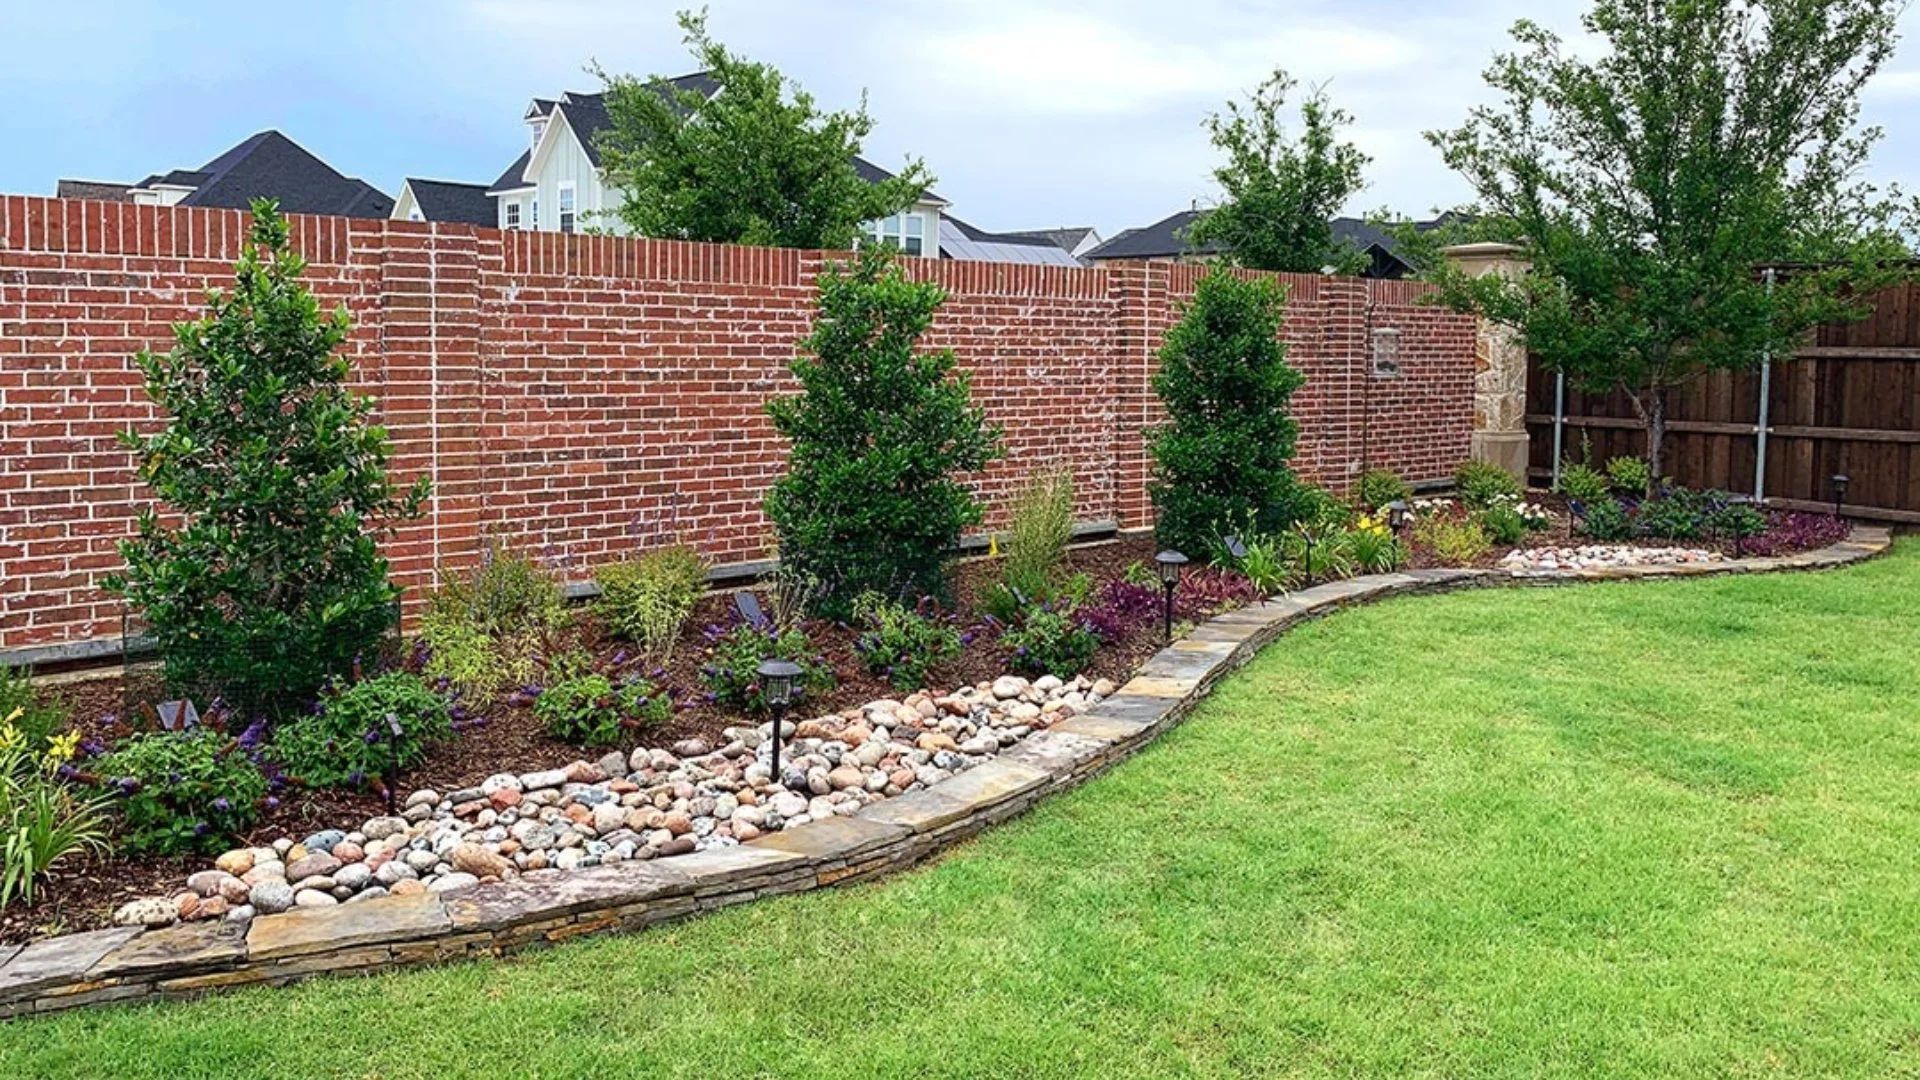 Healthy trees and shrubs at home in Plano, TX.